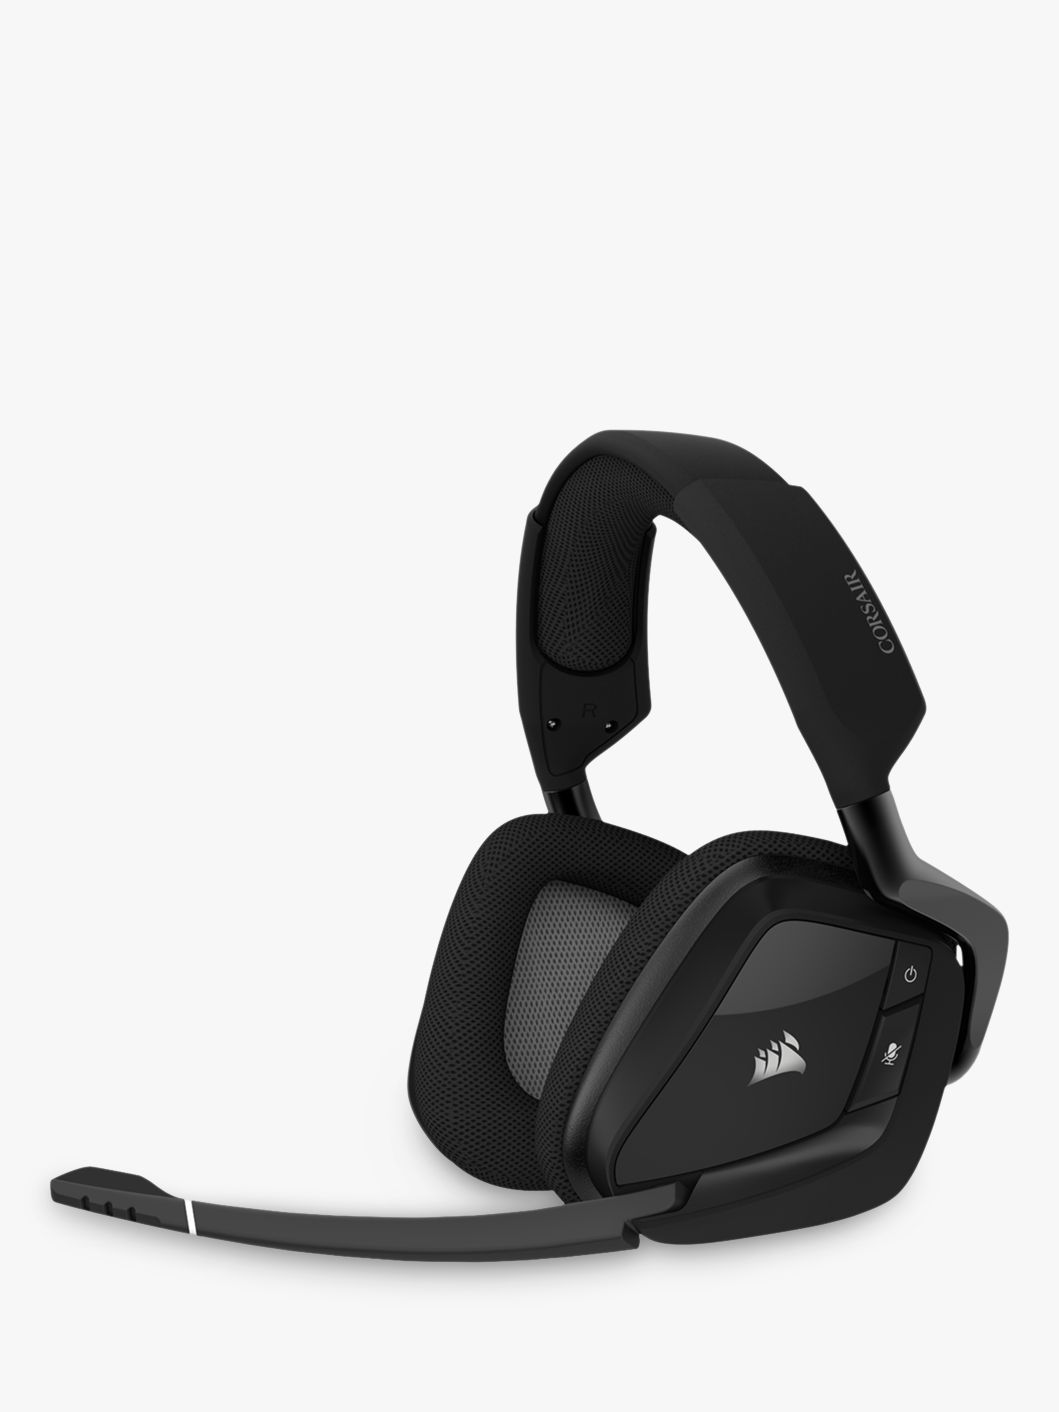 Corsair Void Pro RGB Wireless Dolby 7.1 Surround Gaming Headset, Carbon